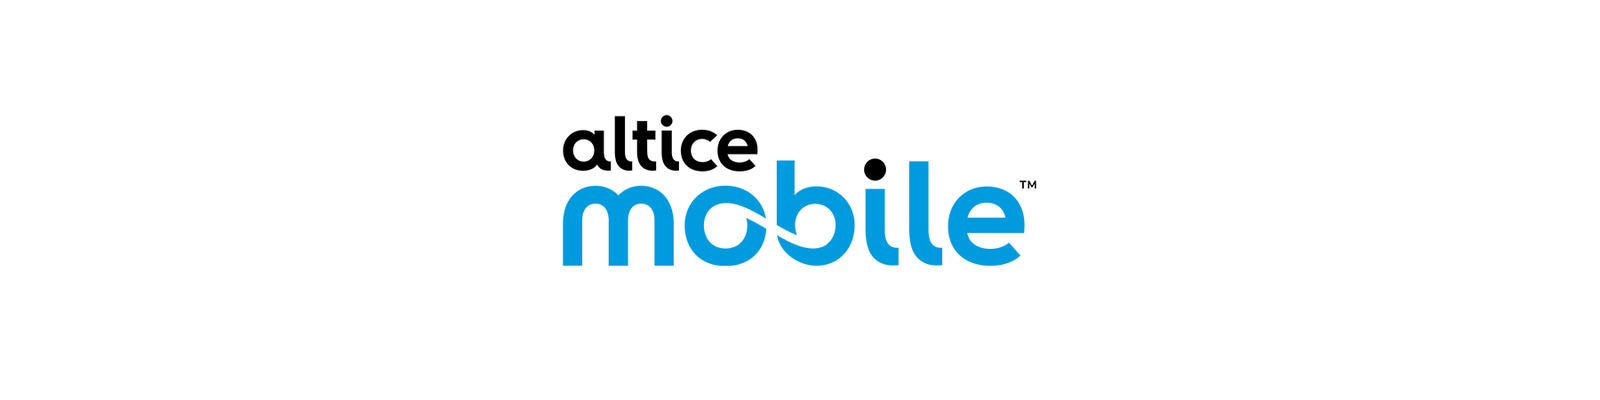 how to port out from altice mobile